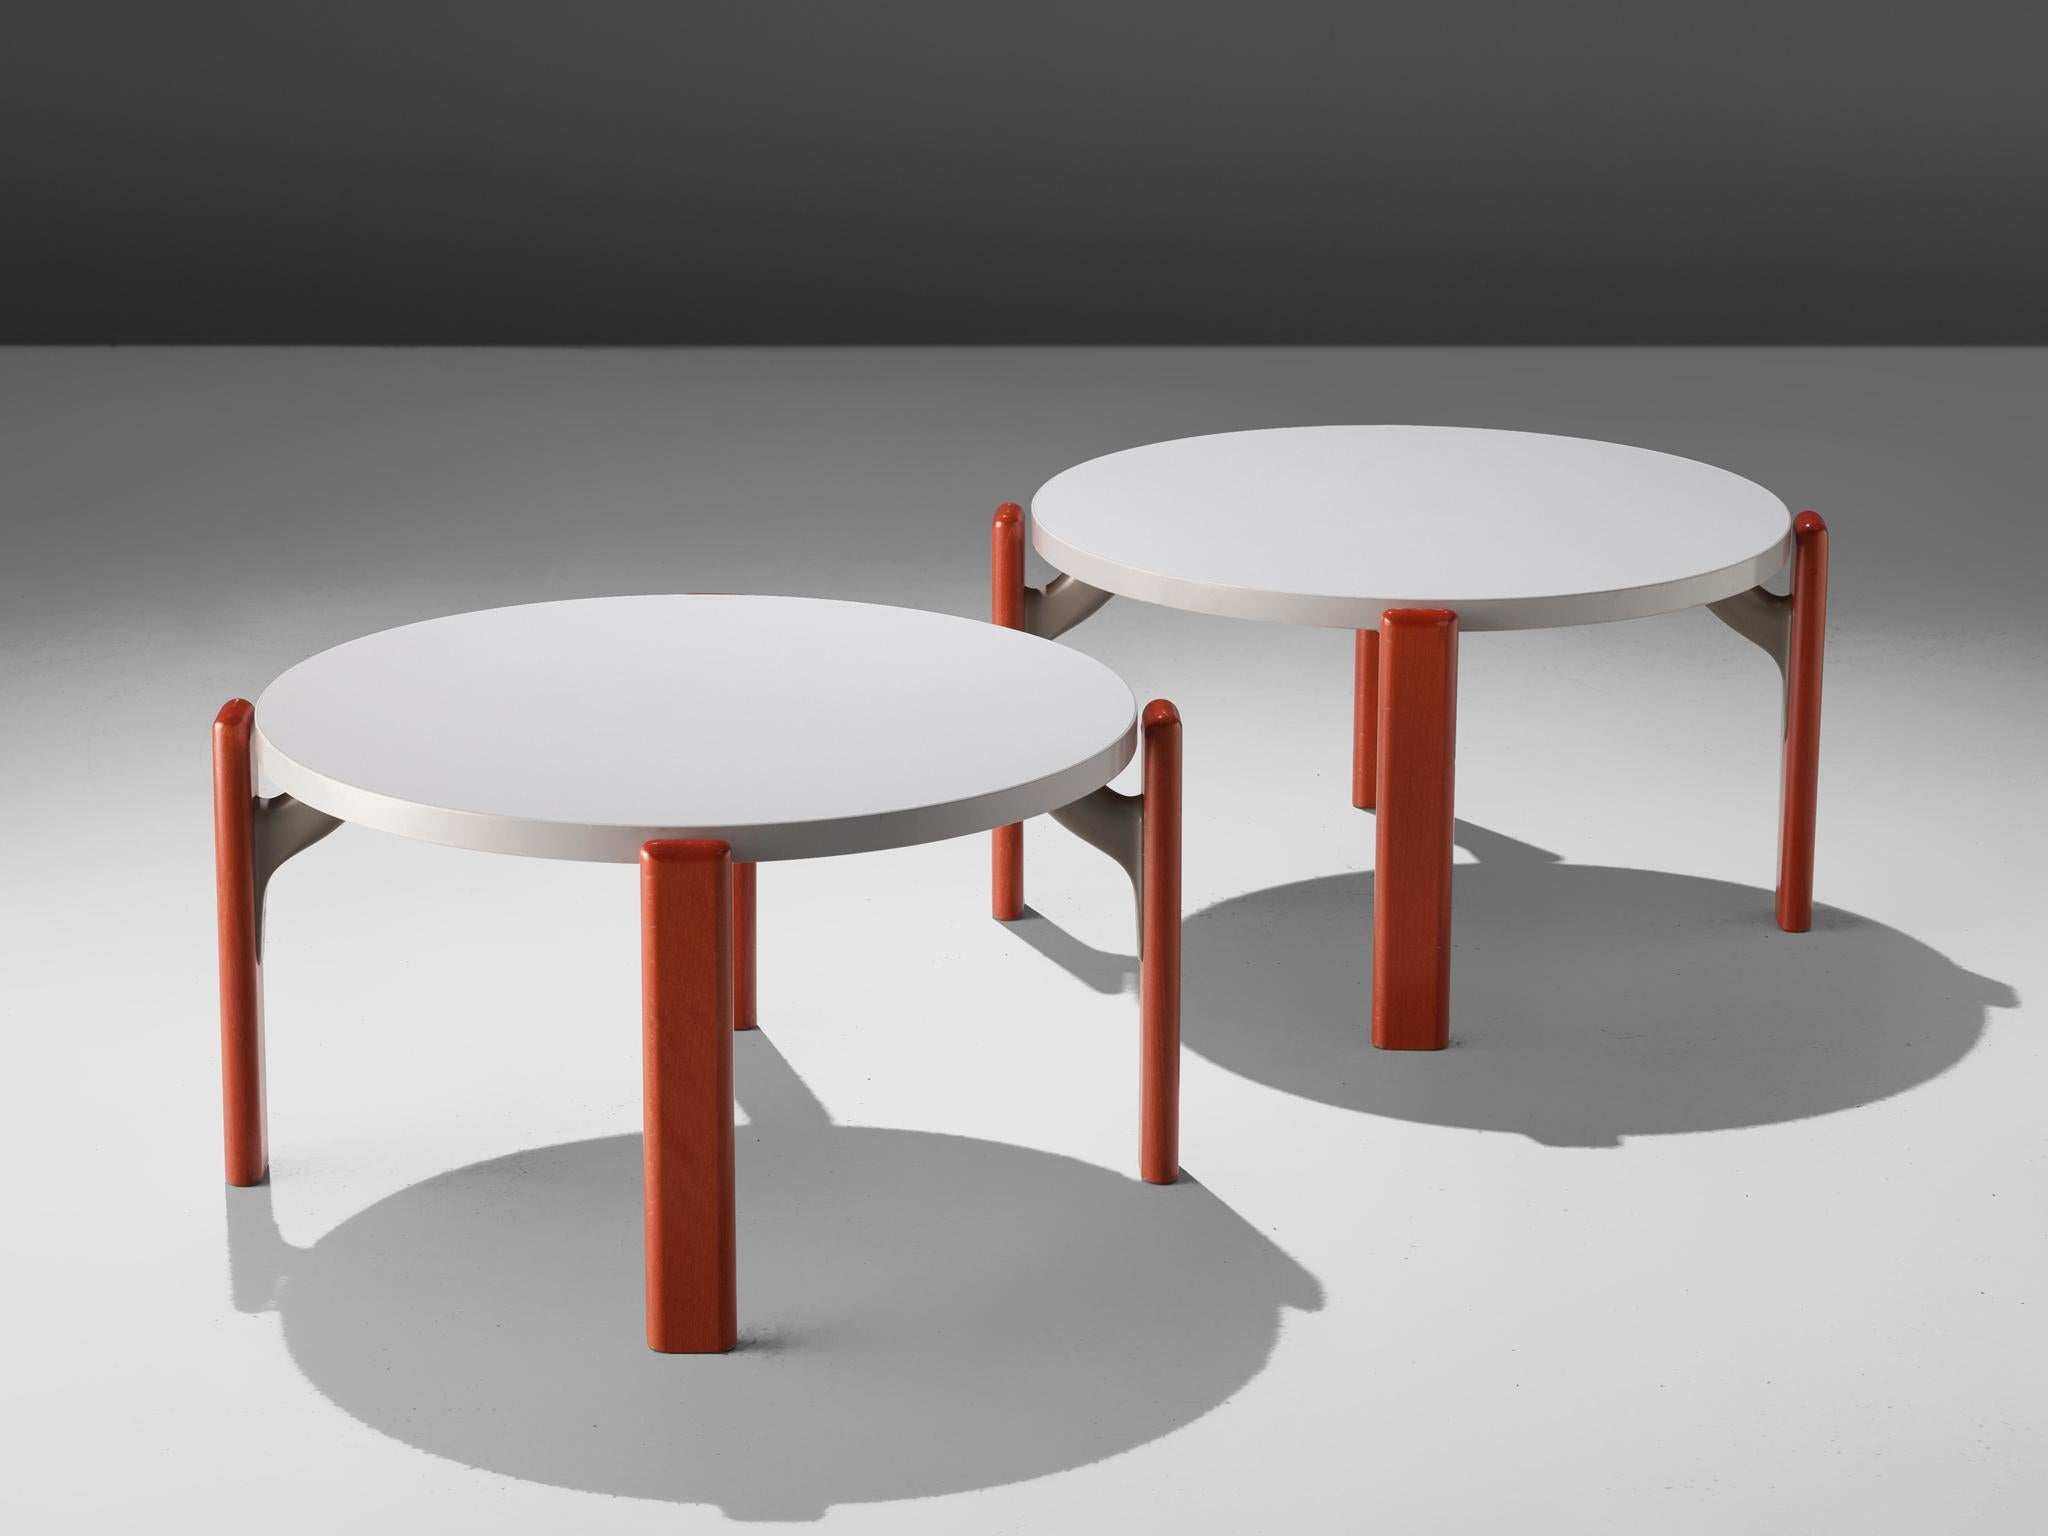 Bruno Rey for Dietiker, coffee tables, lacquered wood, Switzerland, 1970s

These coffee tables, designed by Swiss designer Bruno Rey, have a distinctive design that adds character to any space. Each table has four red lacquered wooden legs